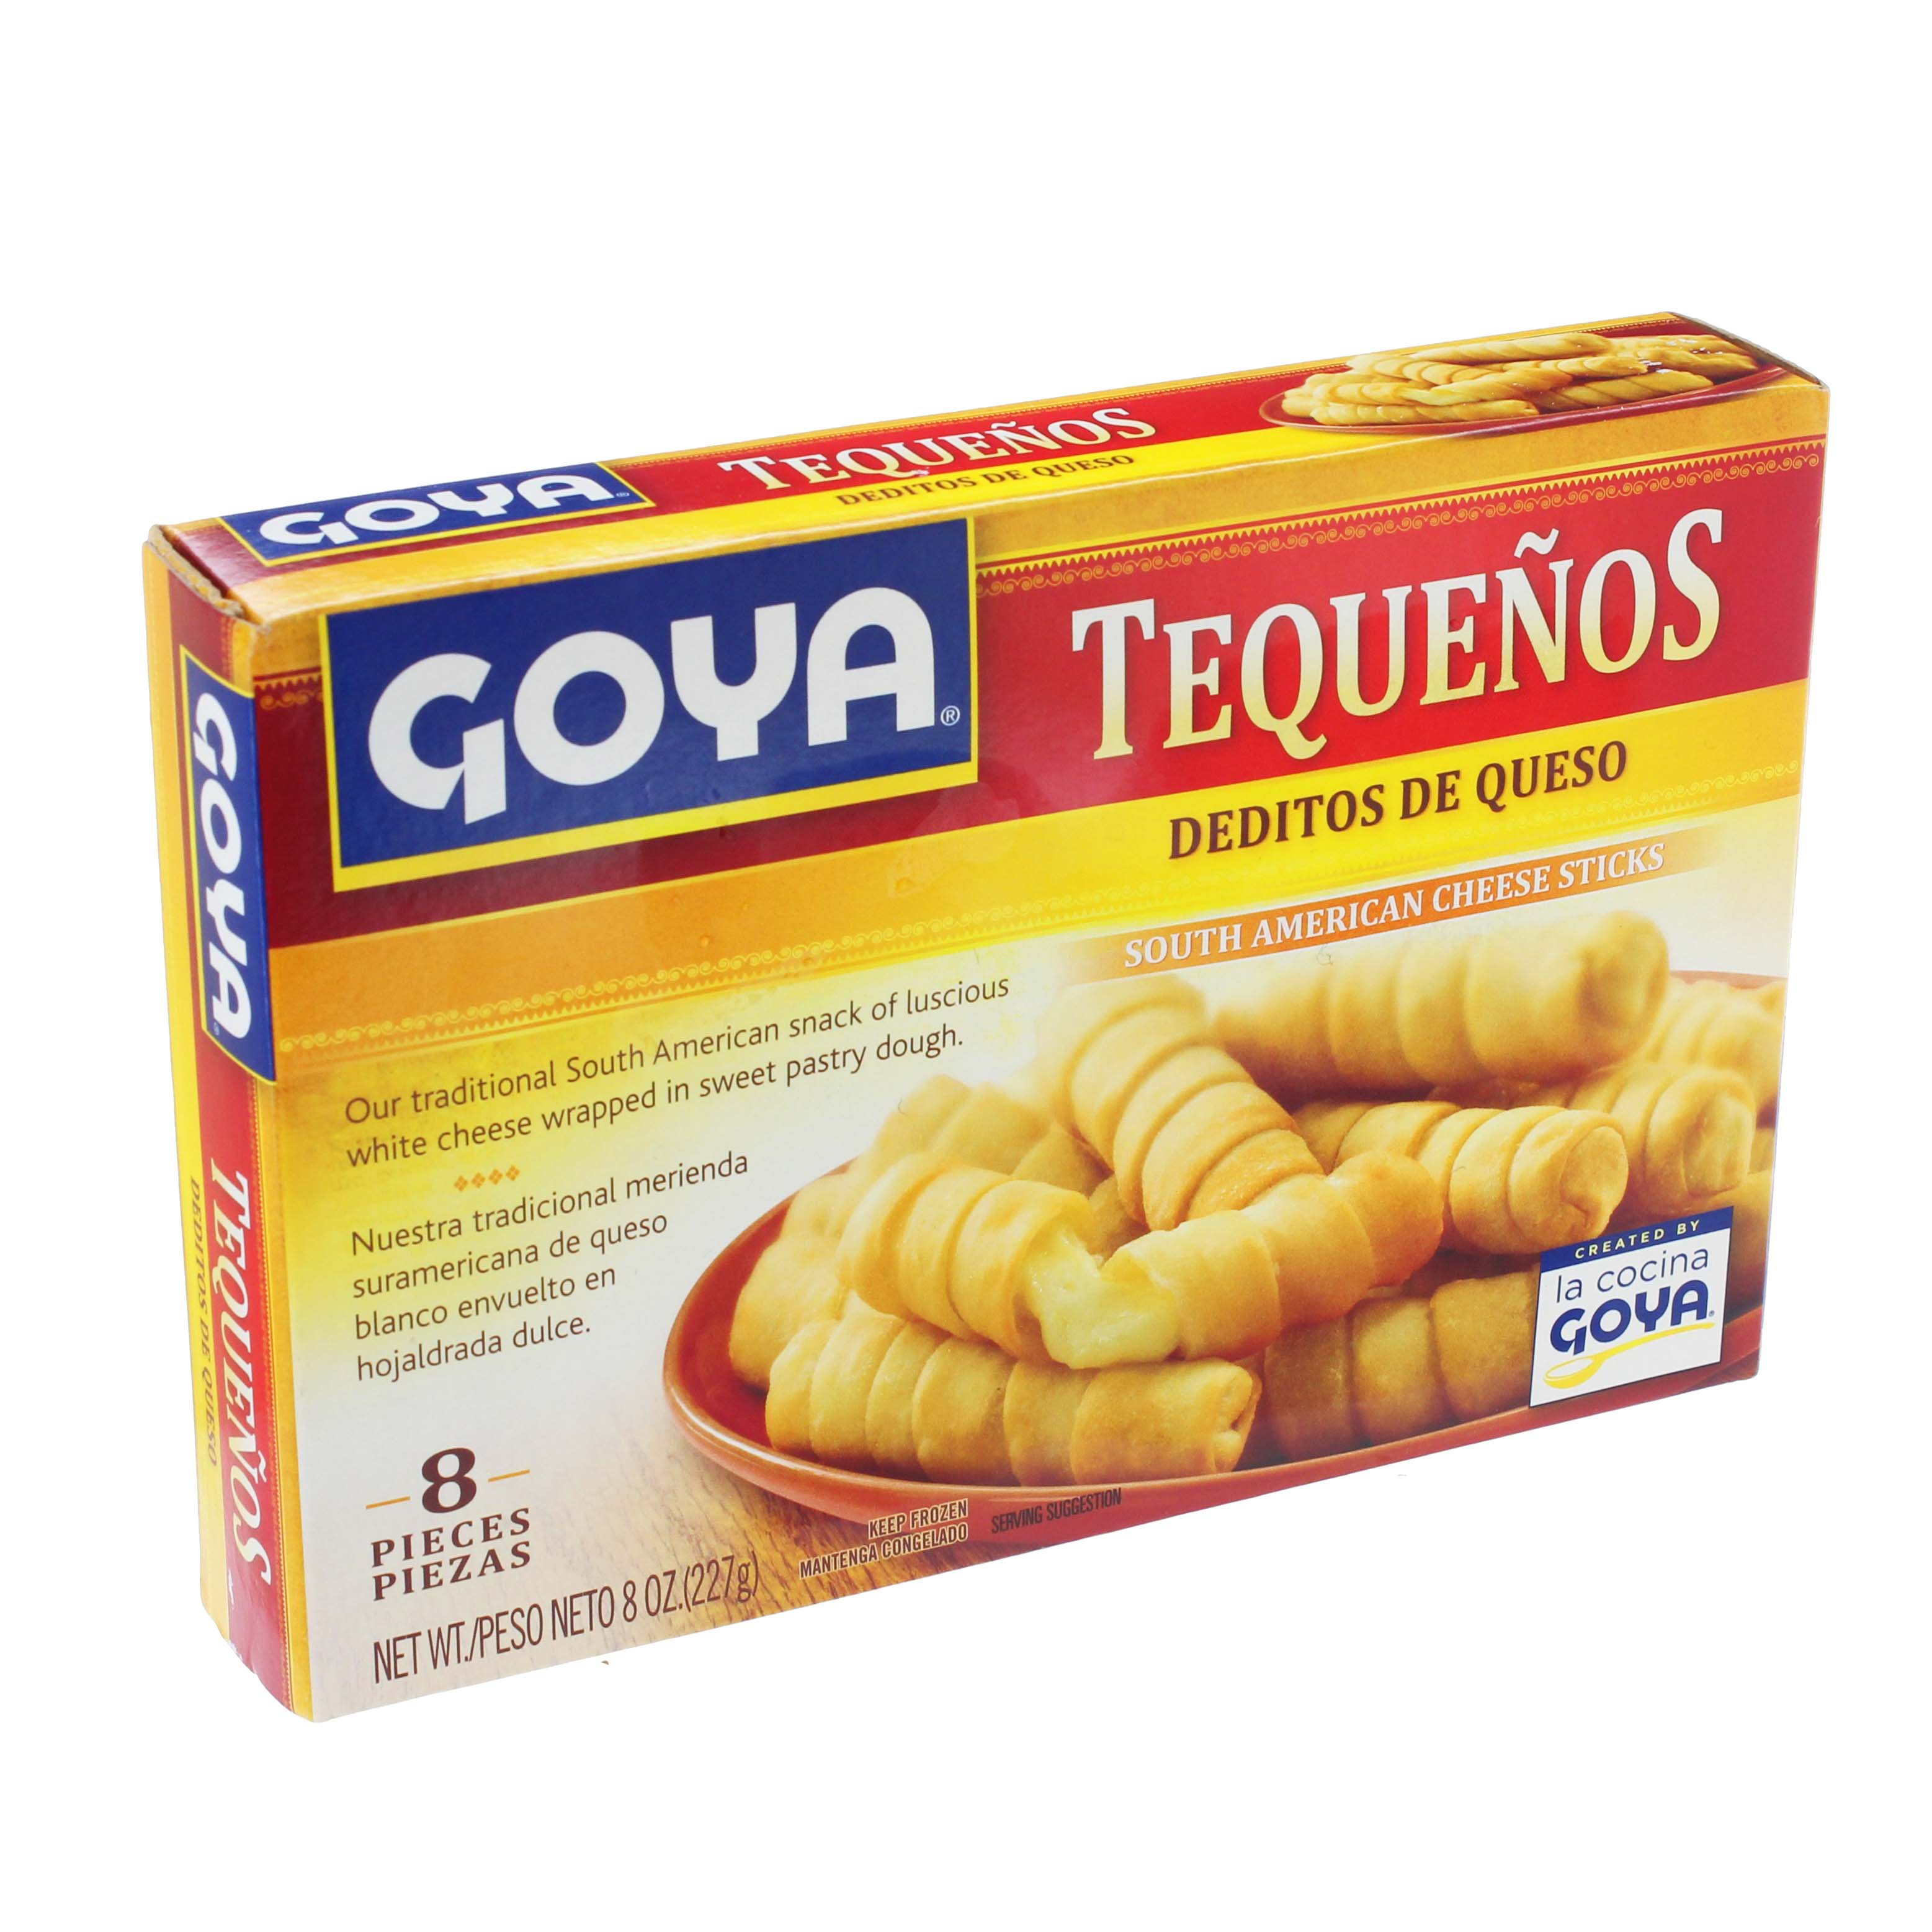 Goya Tequenos South American Cheese Shop Appetizers Sticks H-E-B at 